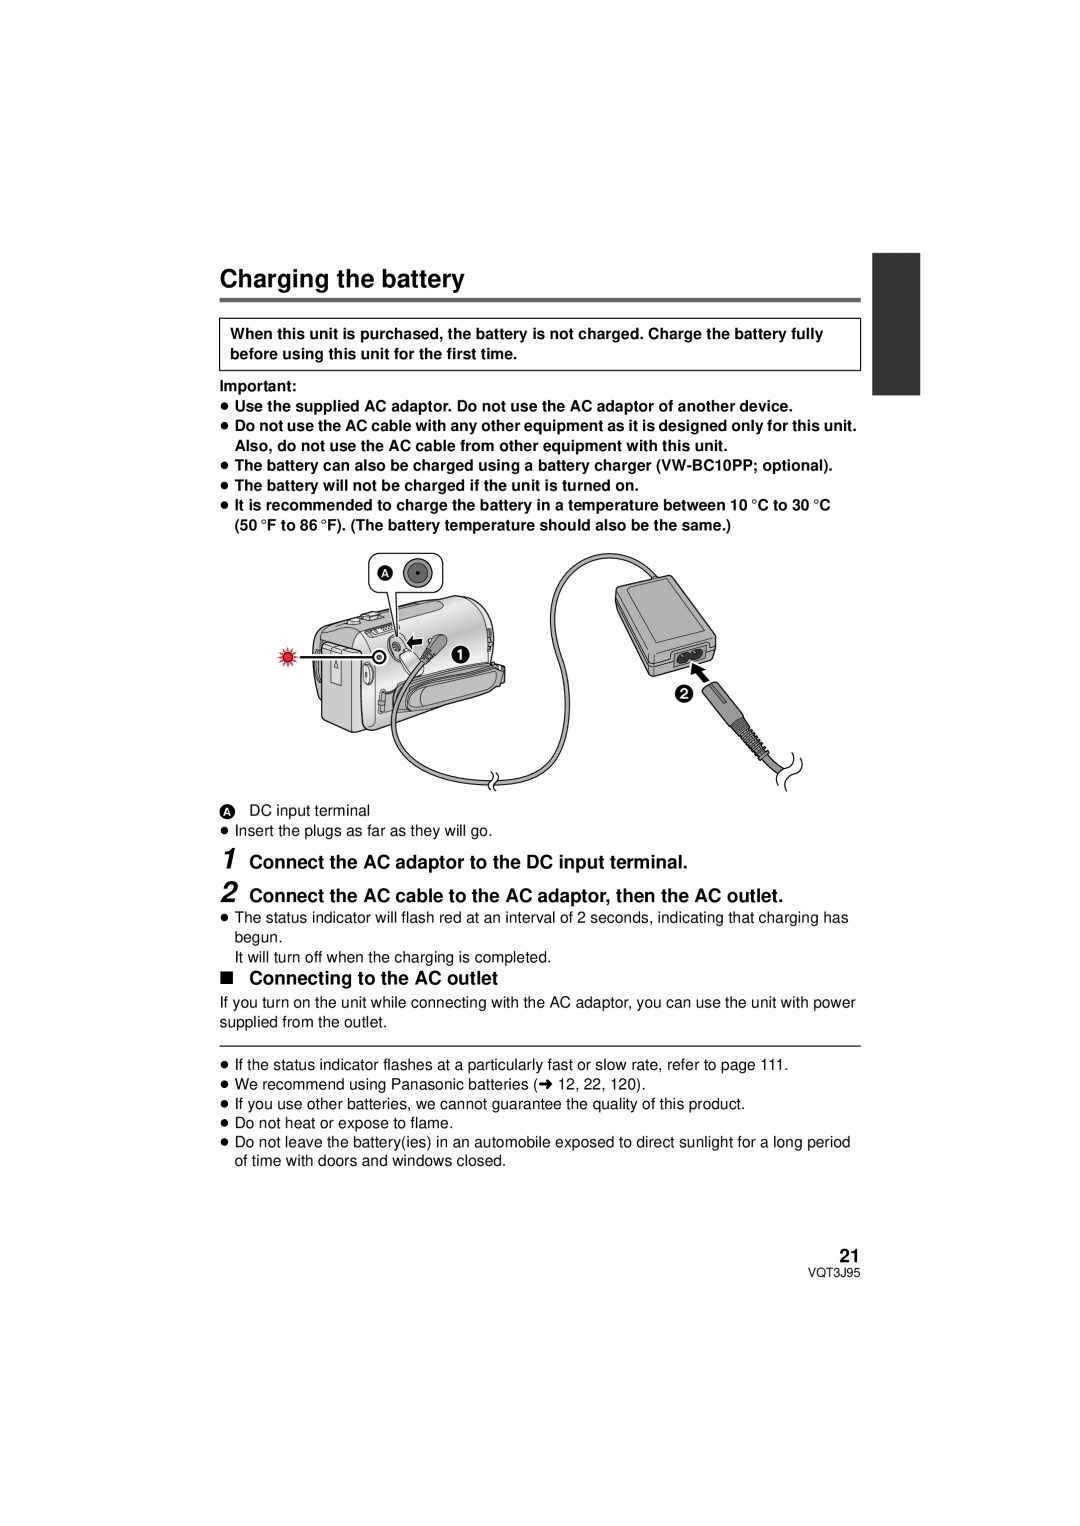 Panasonic HDC-SD40P/PC, HDC-TM41P/PC, HDC-TM40P/PC Charging the battery, Connect the AC adaptor to the DC input terminal 